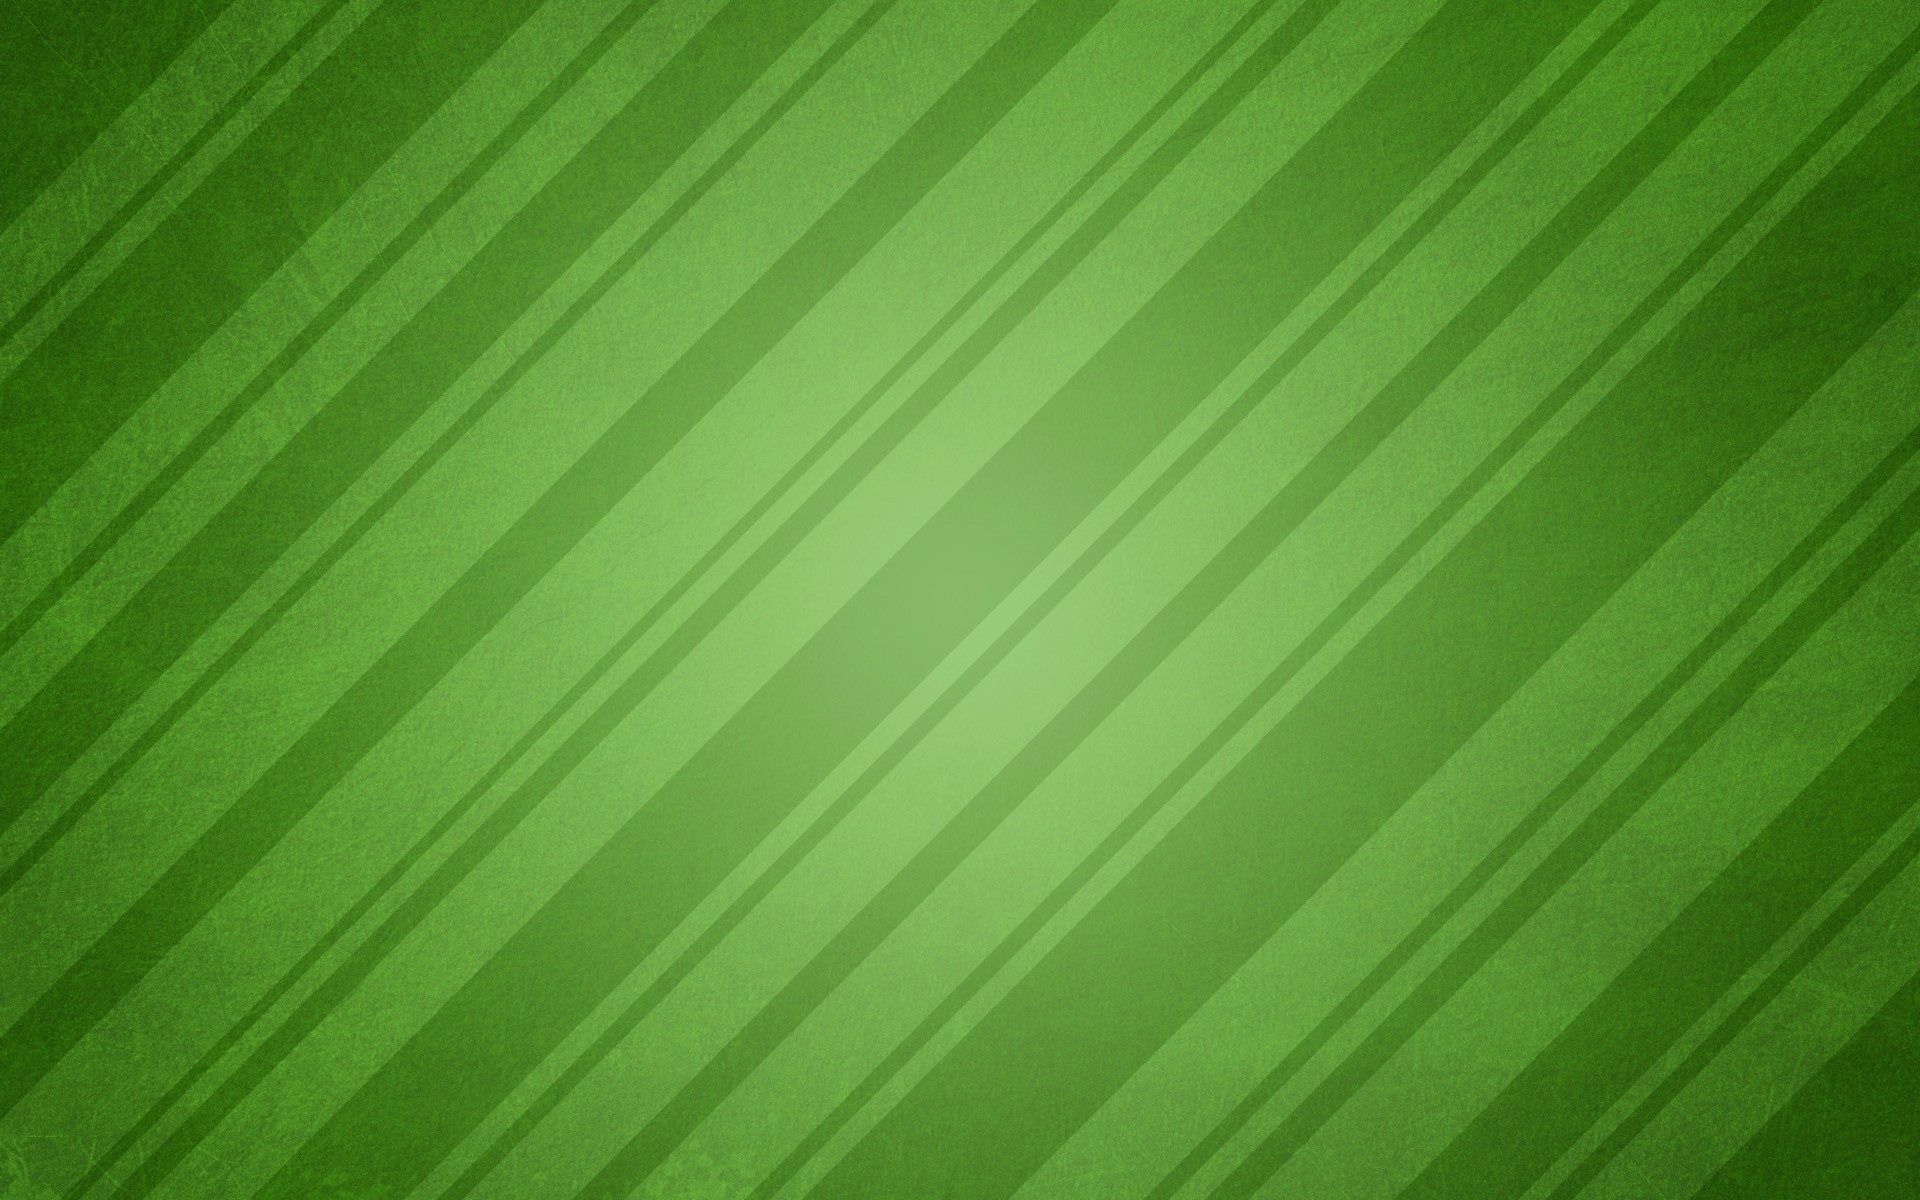 textures, obliquely, stripes, streaks, texture, lines, size cell phone wallpapers